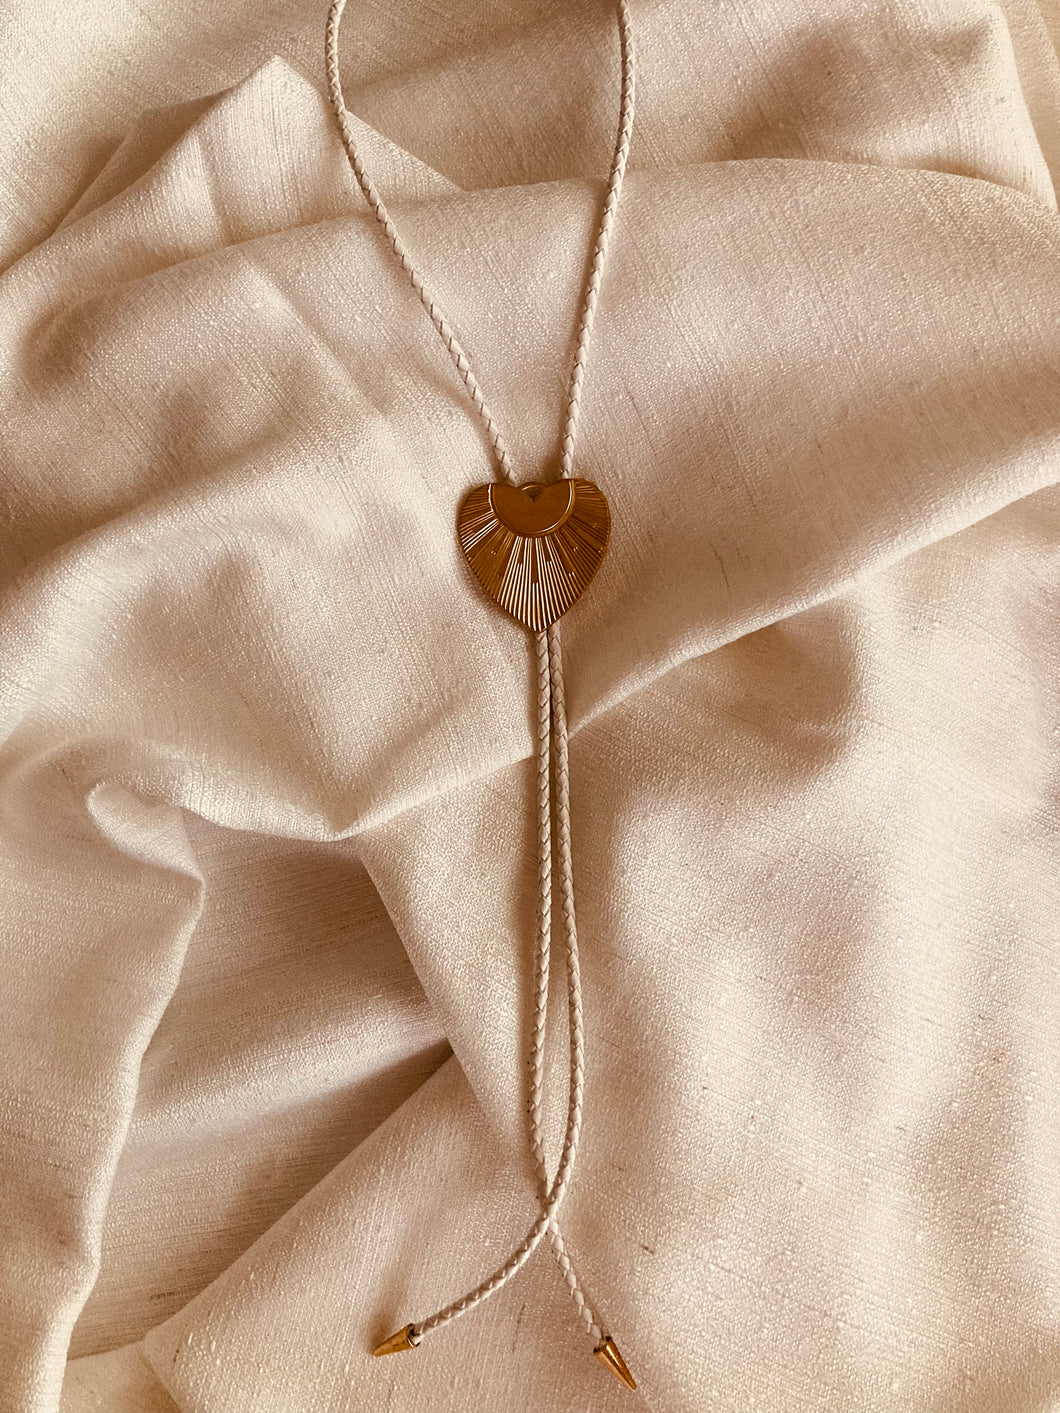 heart of gold bolo